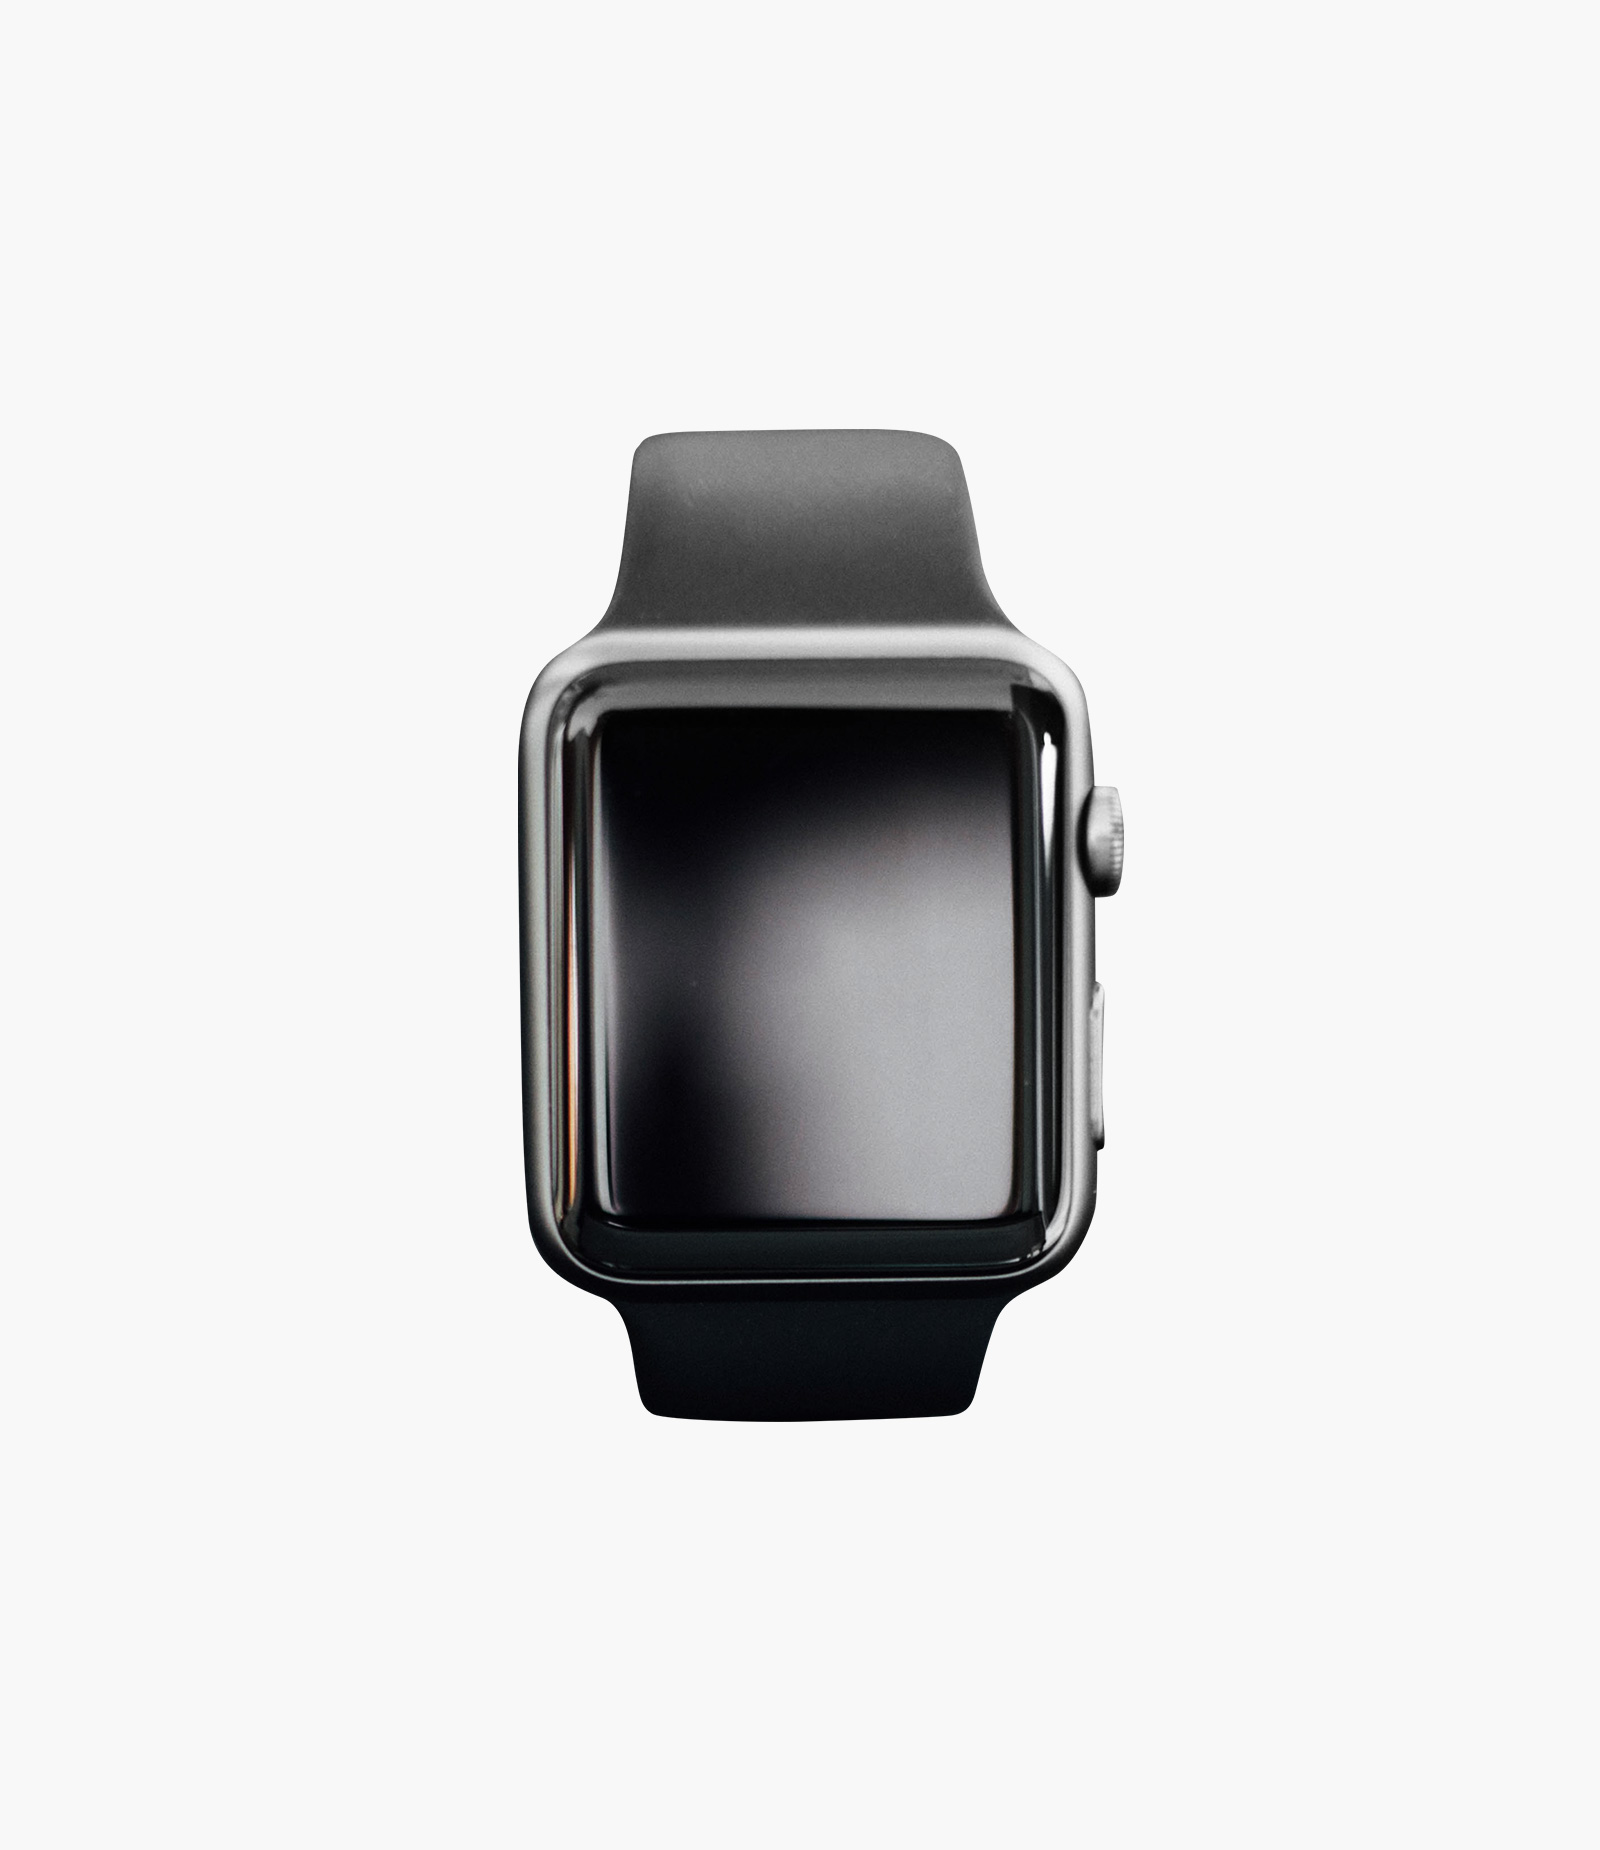 Apple Watch Series 3 Space Gray Aluminum Case with Sport Band